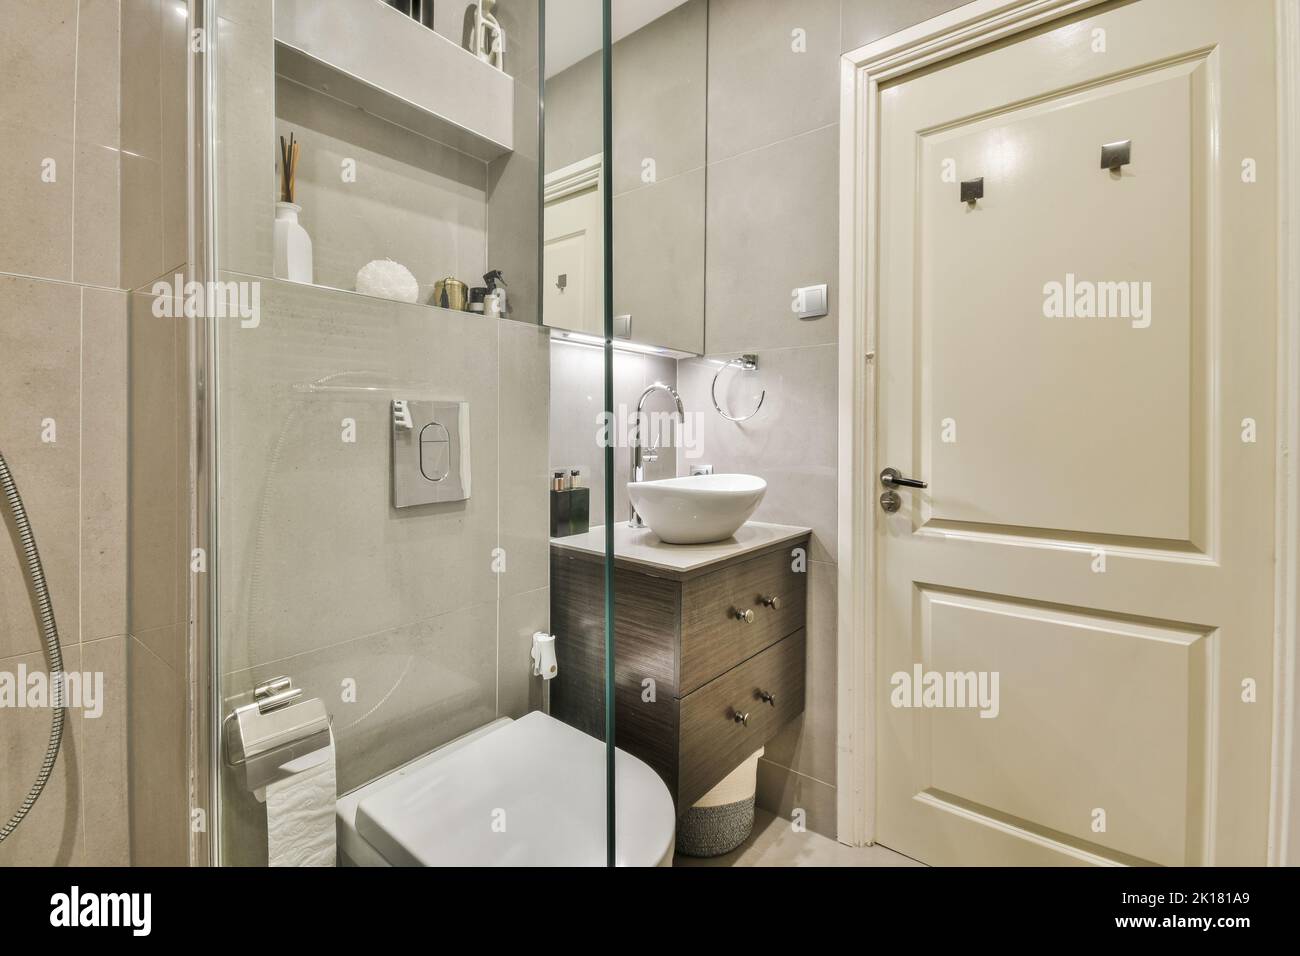 Glass partition between shower tap and wall hung toilet in modern restroom at home Stock Photo